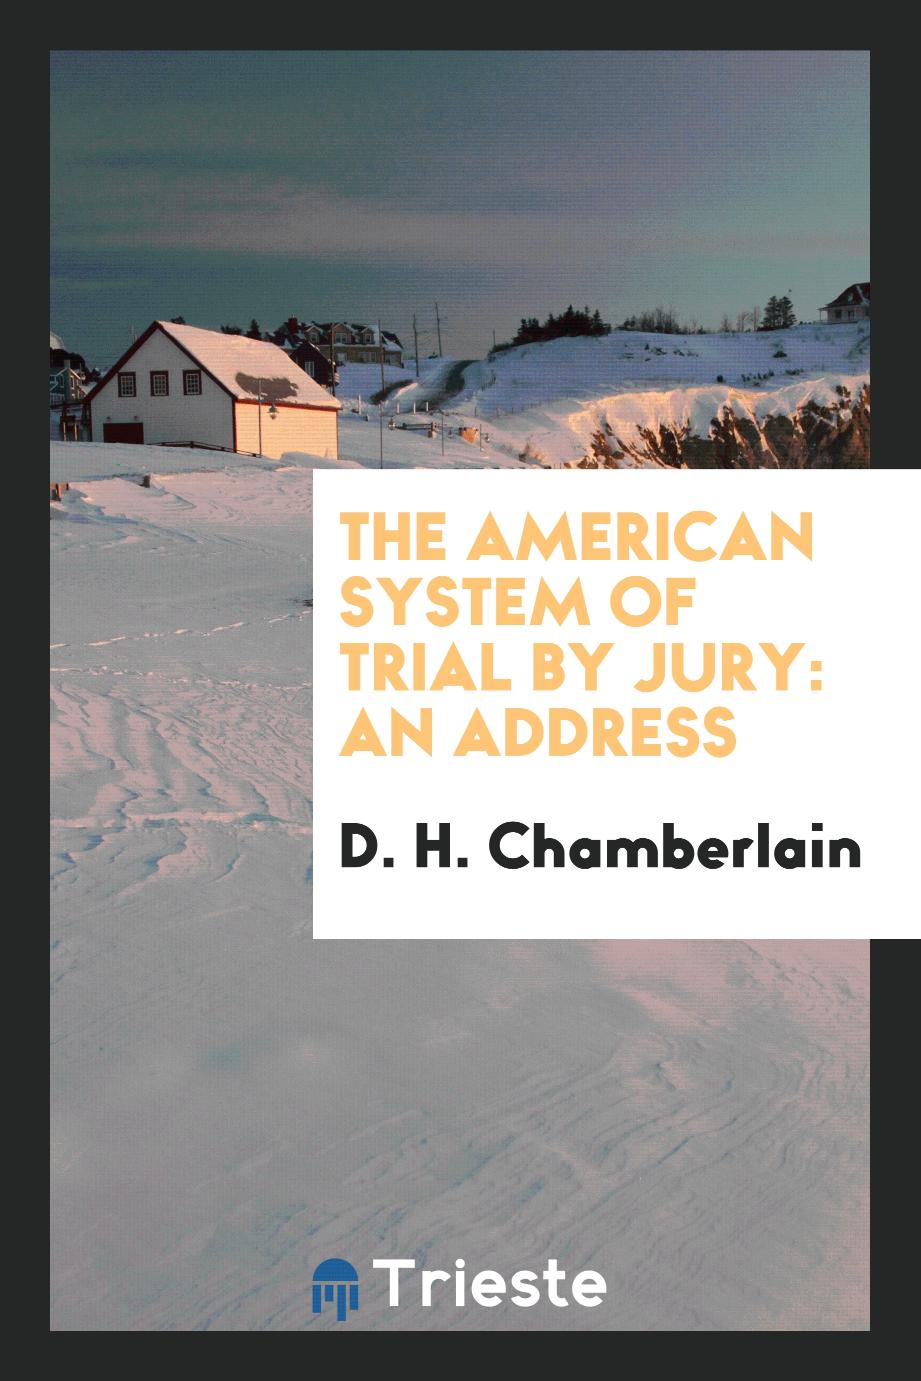 The American System of Trial by Jury: An Address